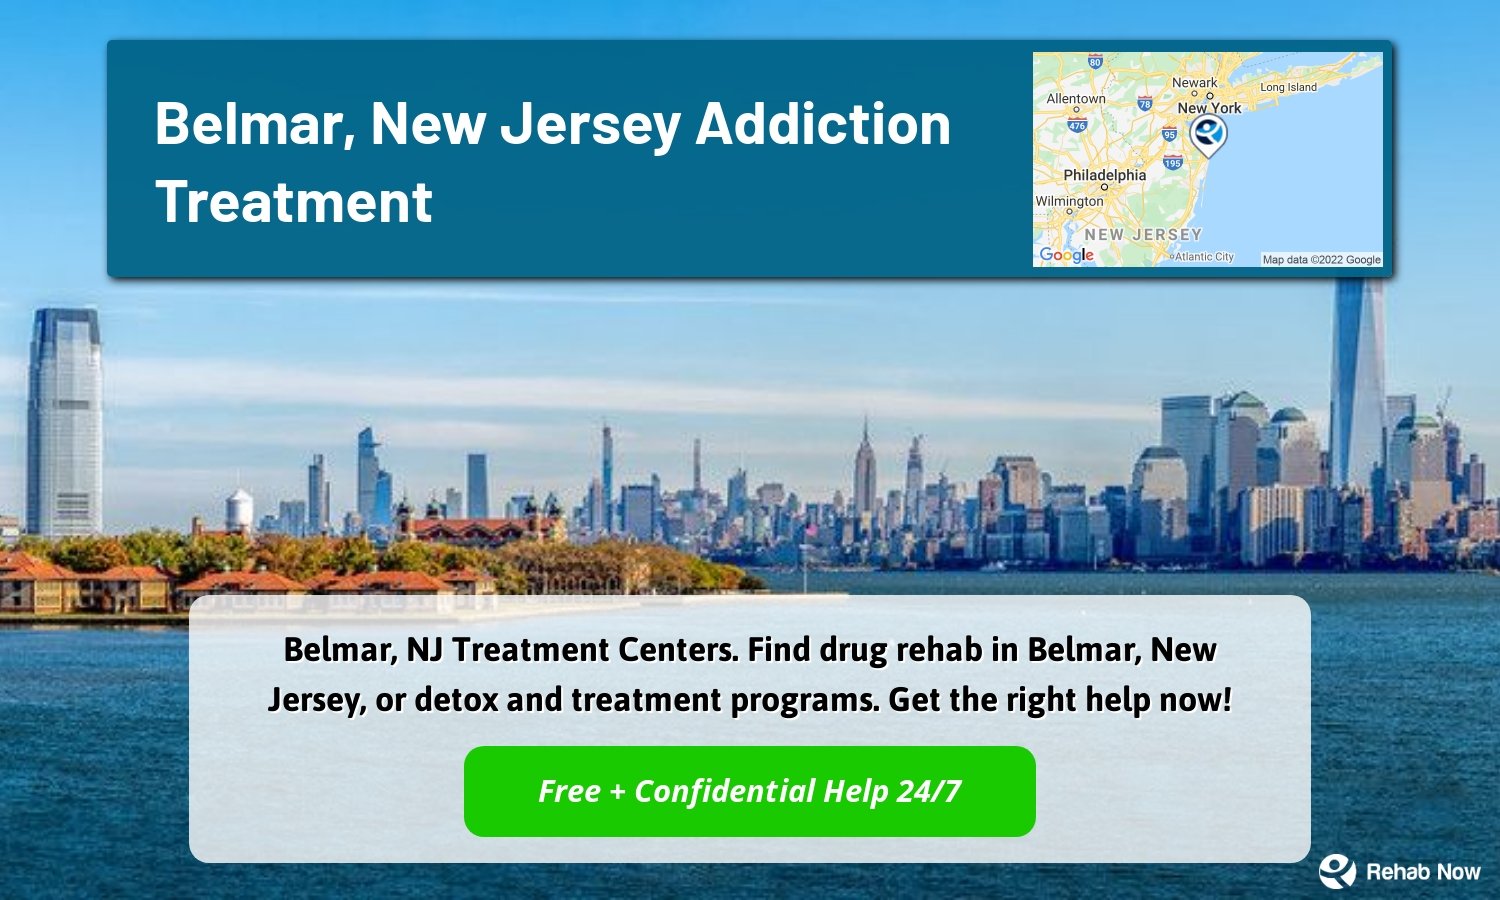 Belmar, NJ Treatment Centers. Find drug rehab in Belmar, New Jersey, or detox and treatment programs. Get the right help now!